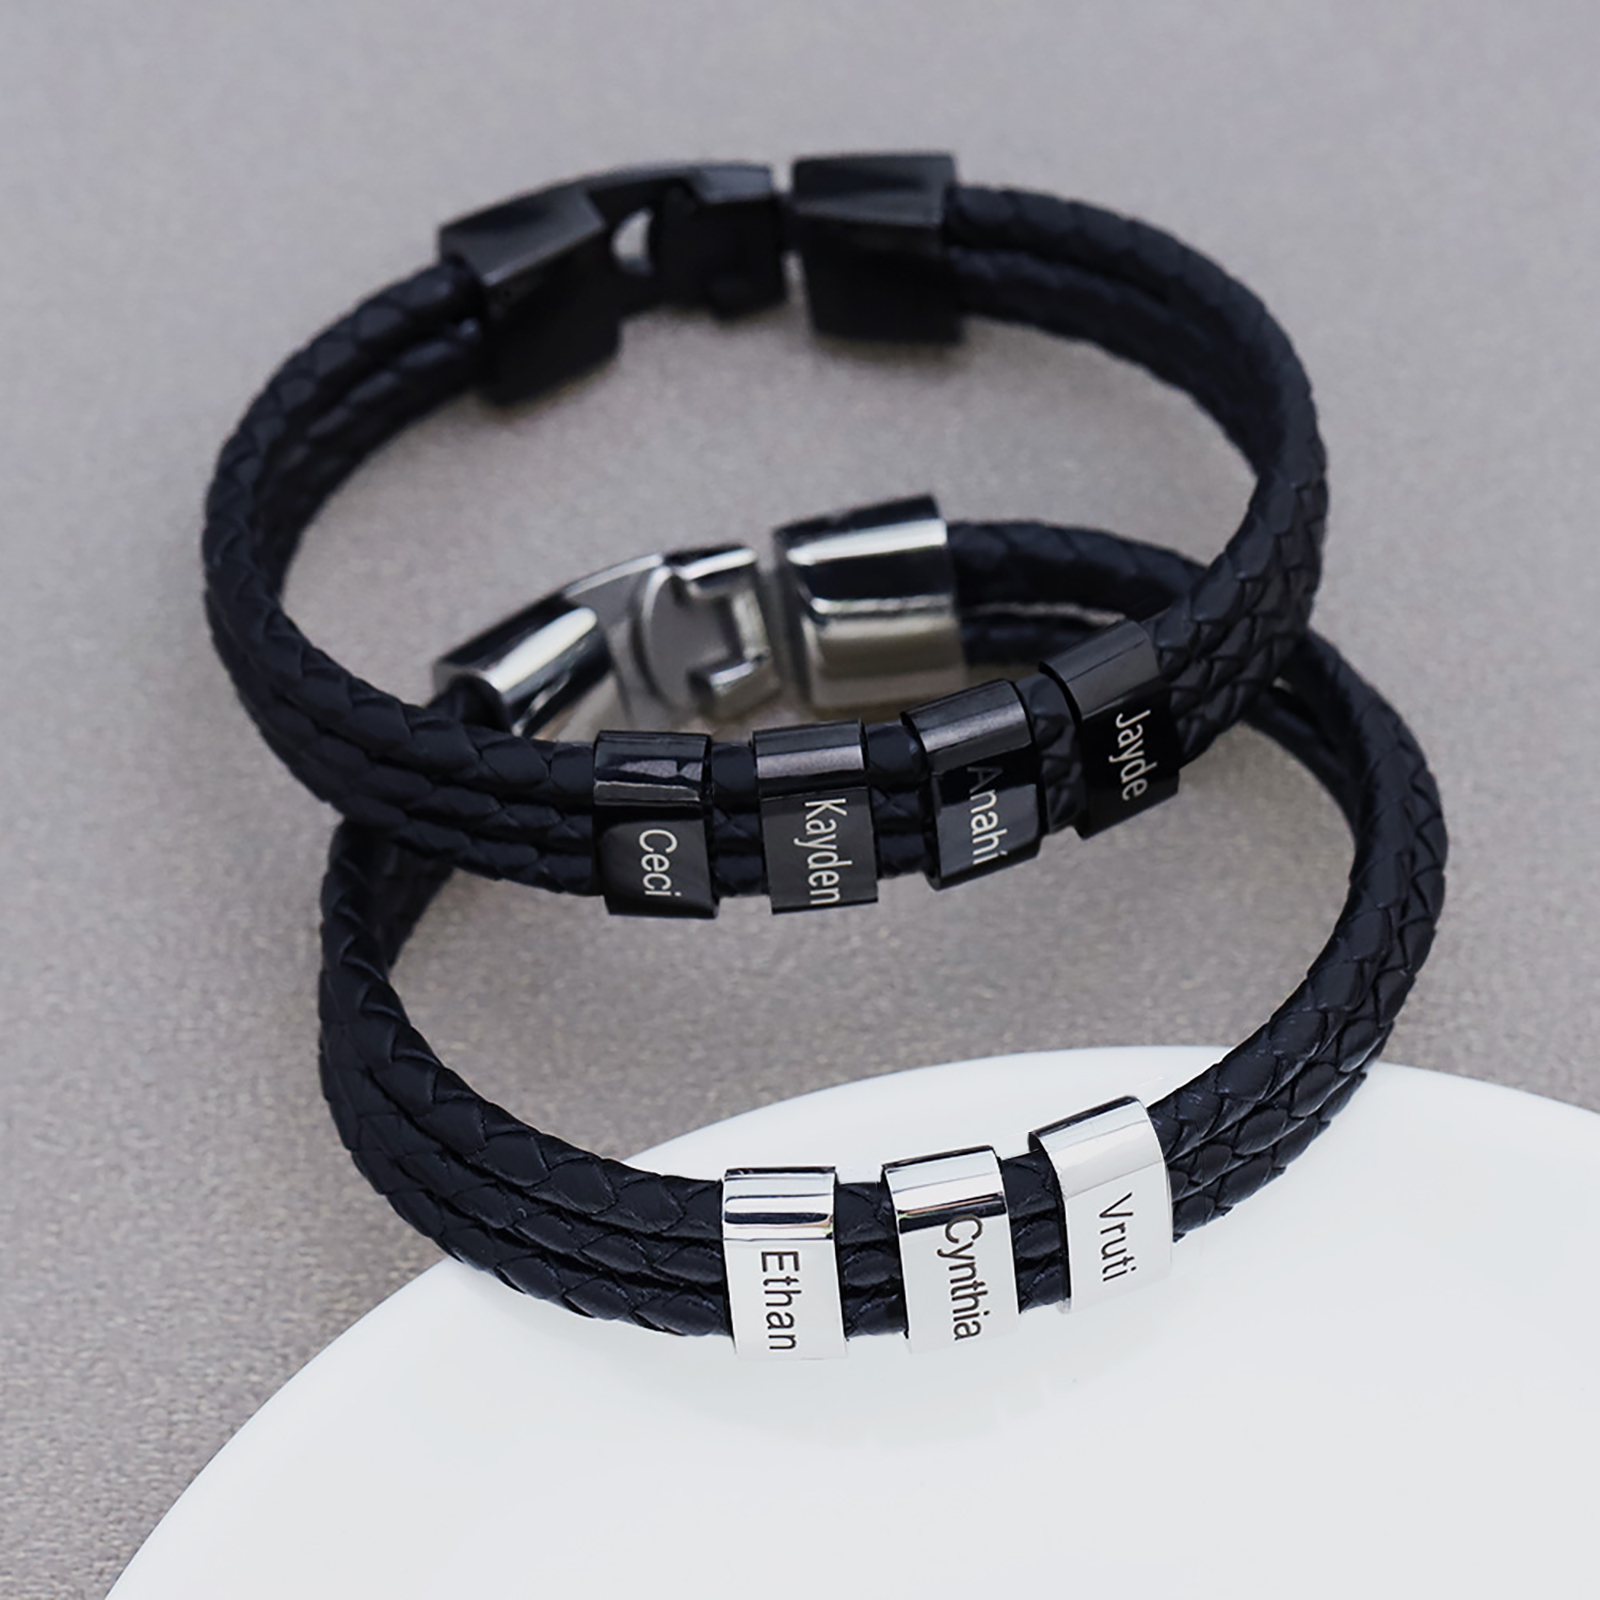 BL3-1 Personalized Braid Leather Bracelets with Custom Engraved Name